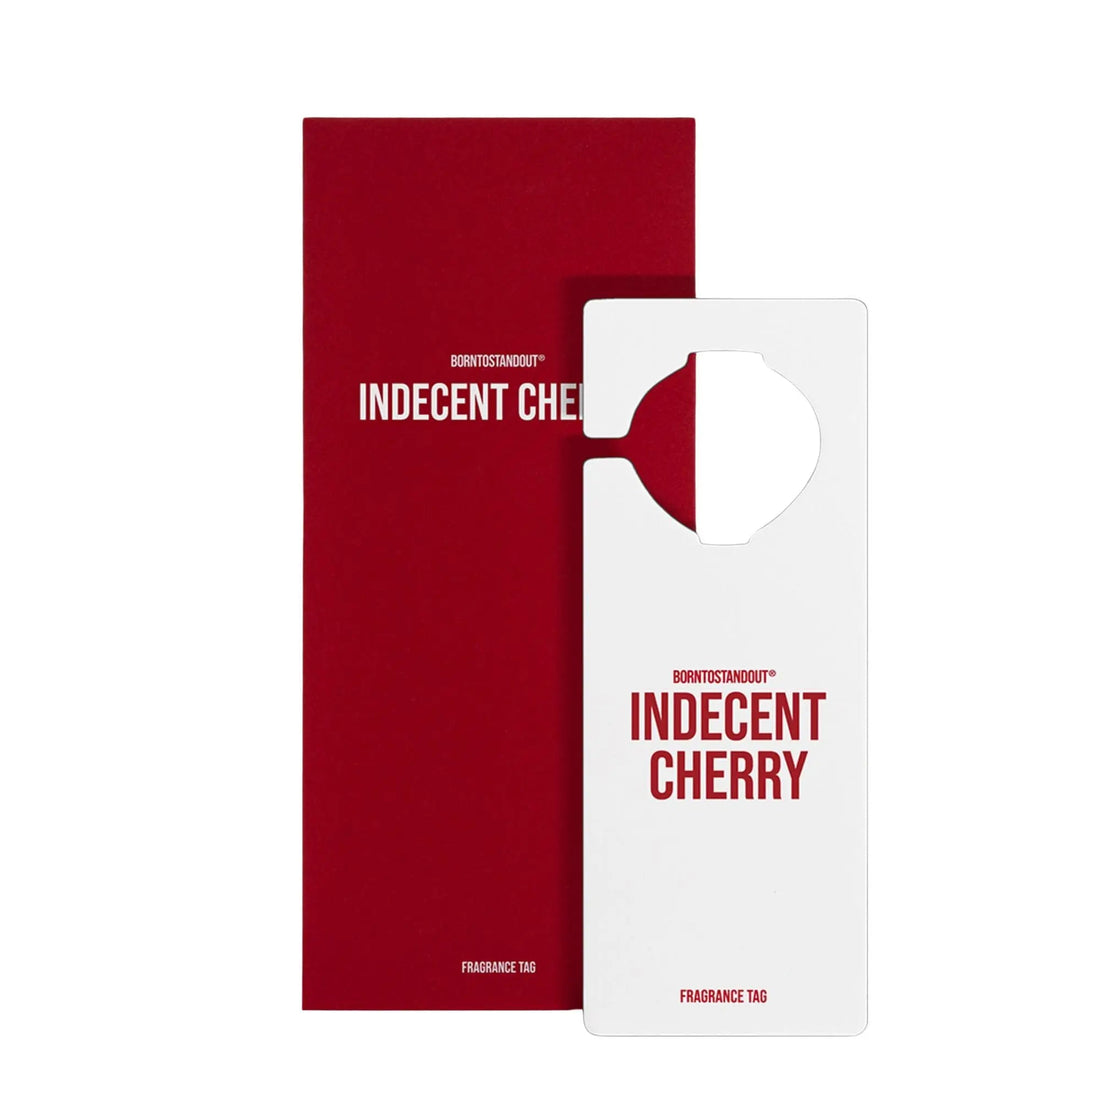 Born to stand out Indecent Cherry Fragrance Tag 1 Pezzo